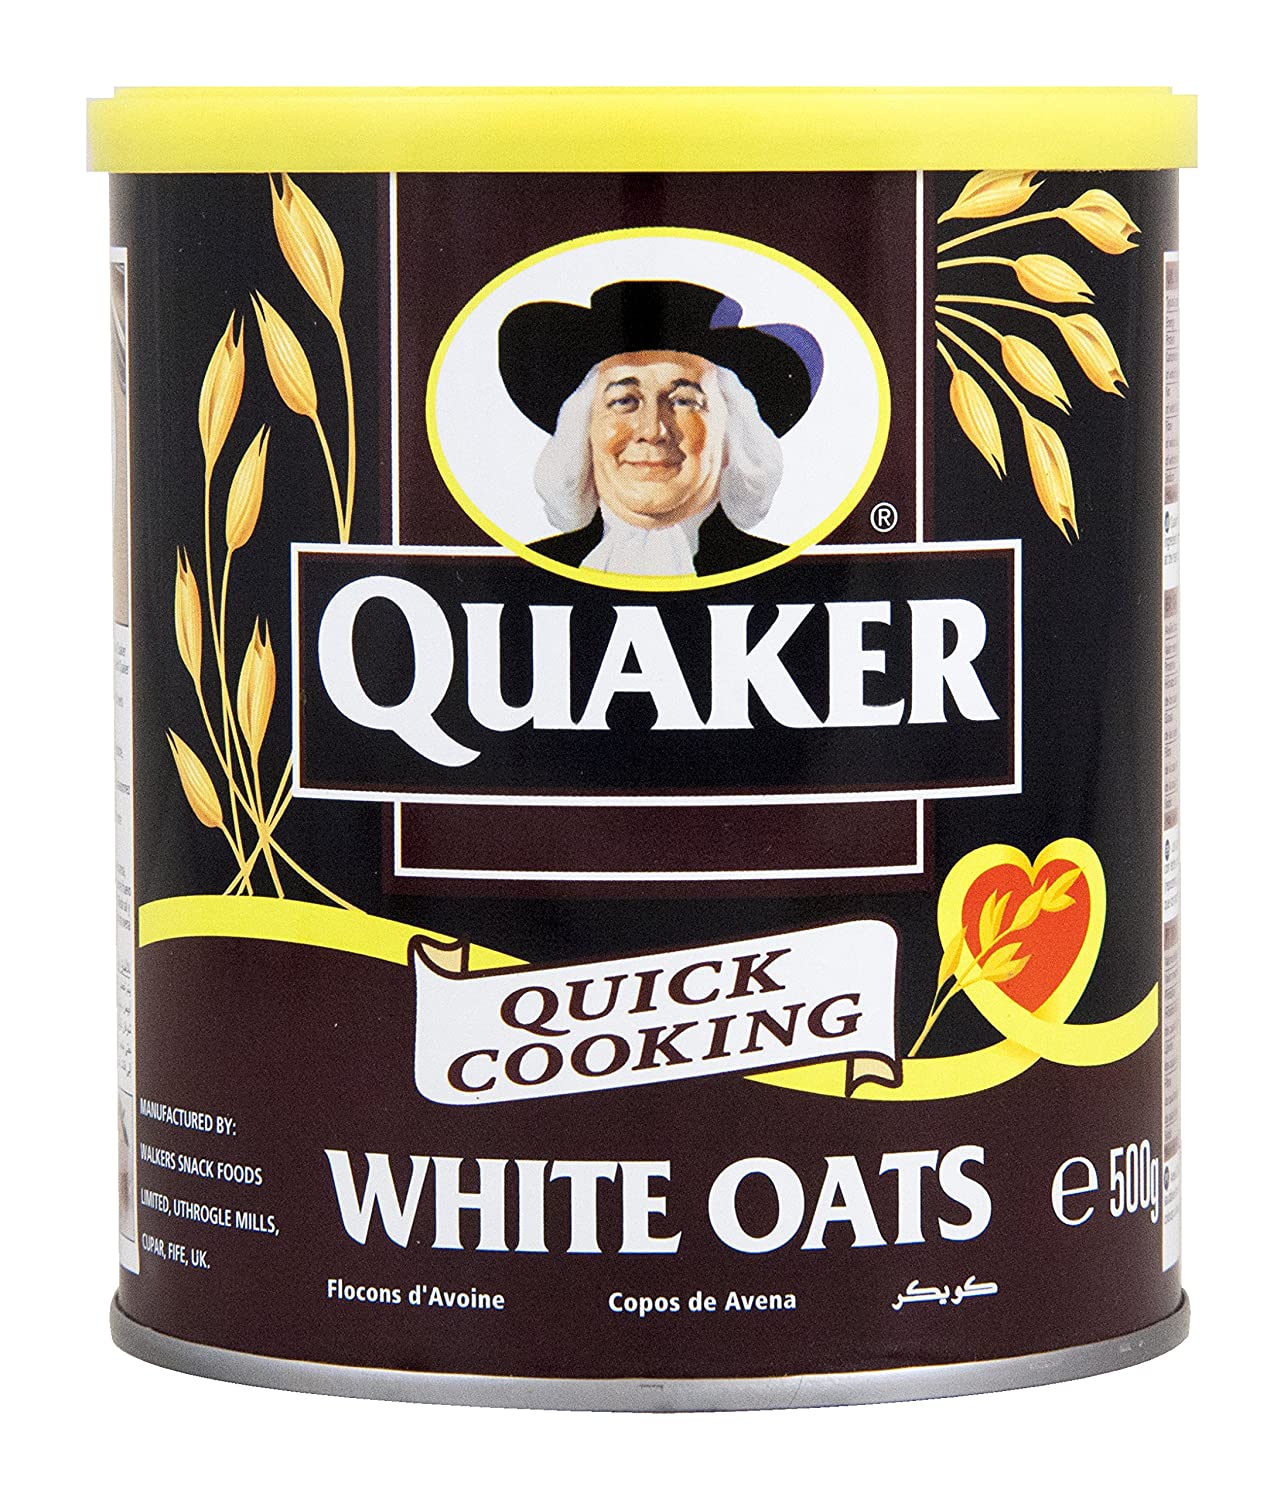 Quakar Quick Cooking White Oats Image